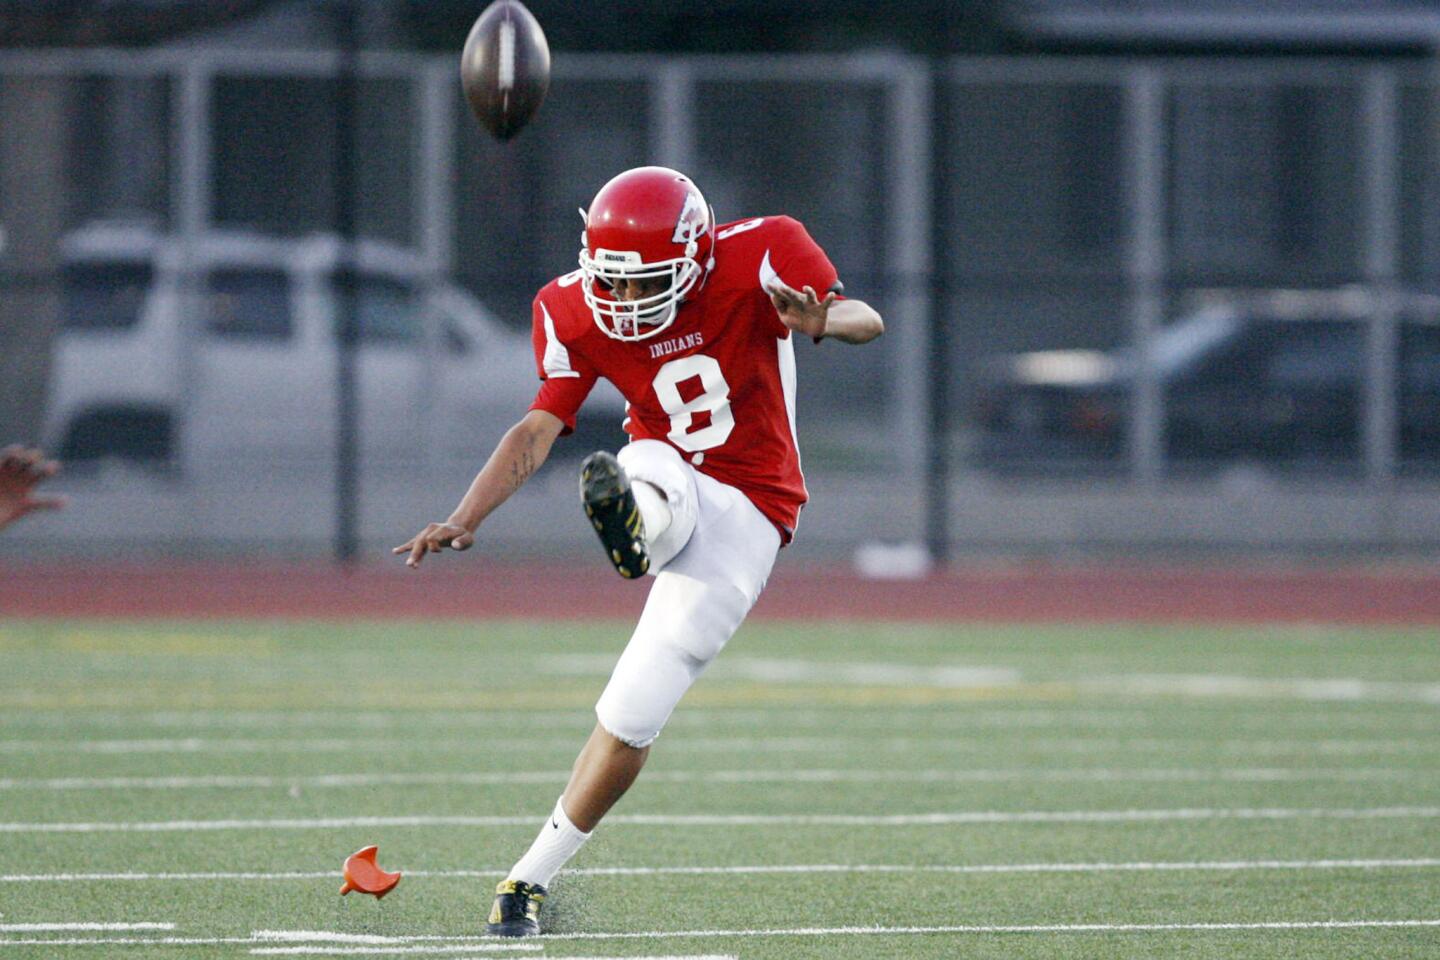 Burroughs' Jairo Gomez kicks off the ball during a game against North Hollywood at John Burroughs High School in Burbank on Friday, September 7, 2012.